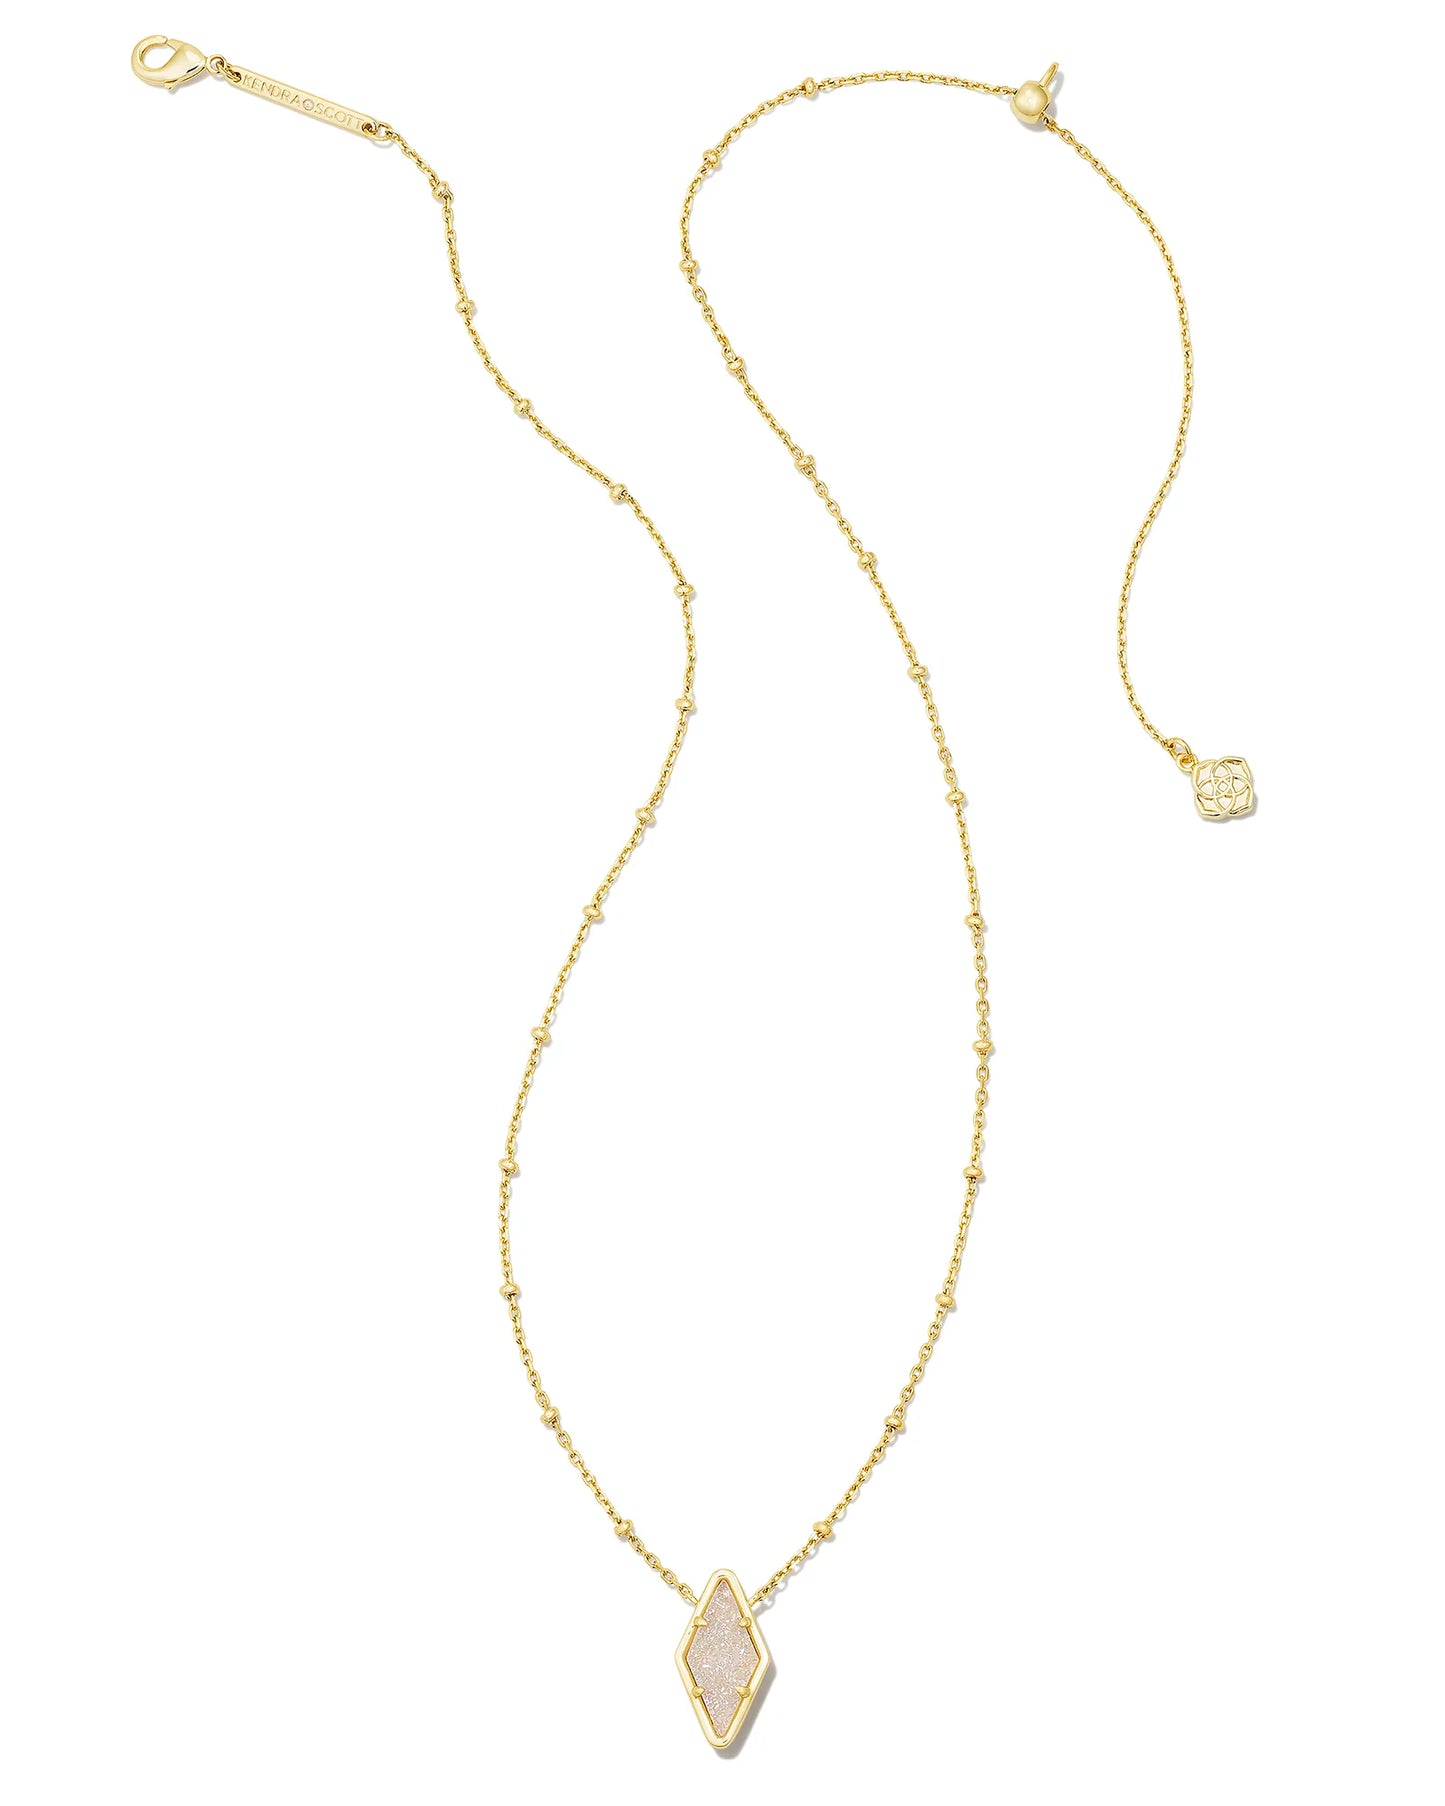 Kendra Scott Kinsley Short Pendant Necklace Gold Iridescent Drusy-Necklaces-Kendra Scott-N00329GLD-The Twisted Chandelier